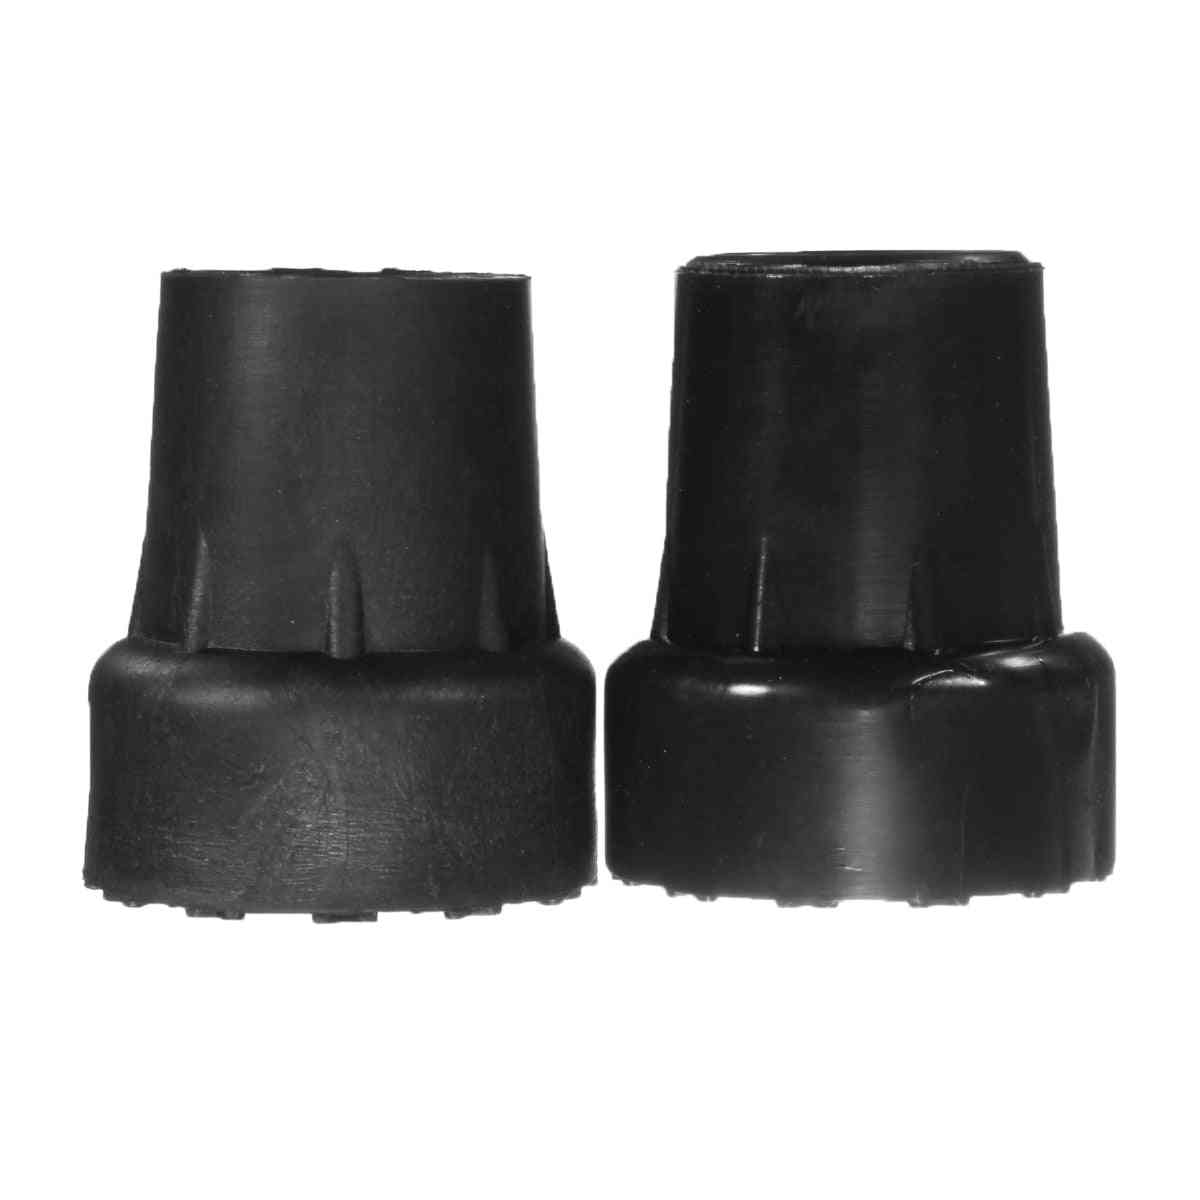 Rubber Pad Cap Antiskid For Caliber Walking Stick, Crutch Cane Bottom Pads Cover Protector